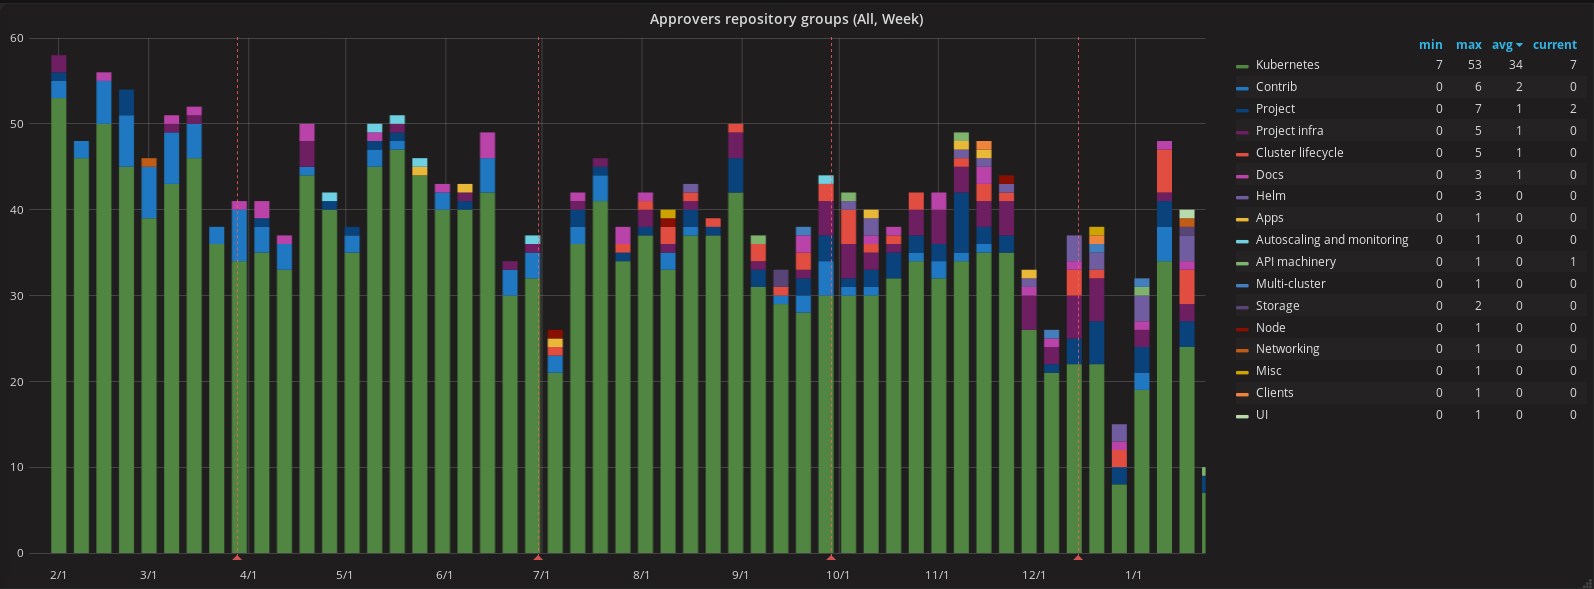 graph of approvals by week